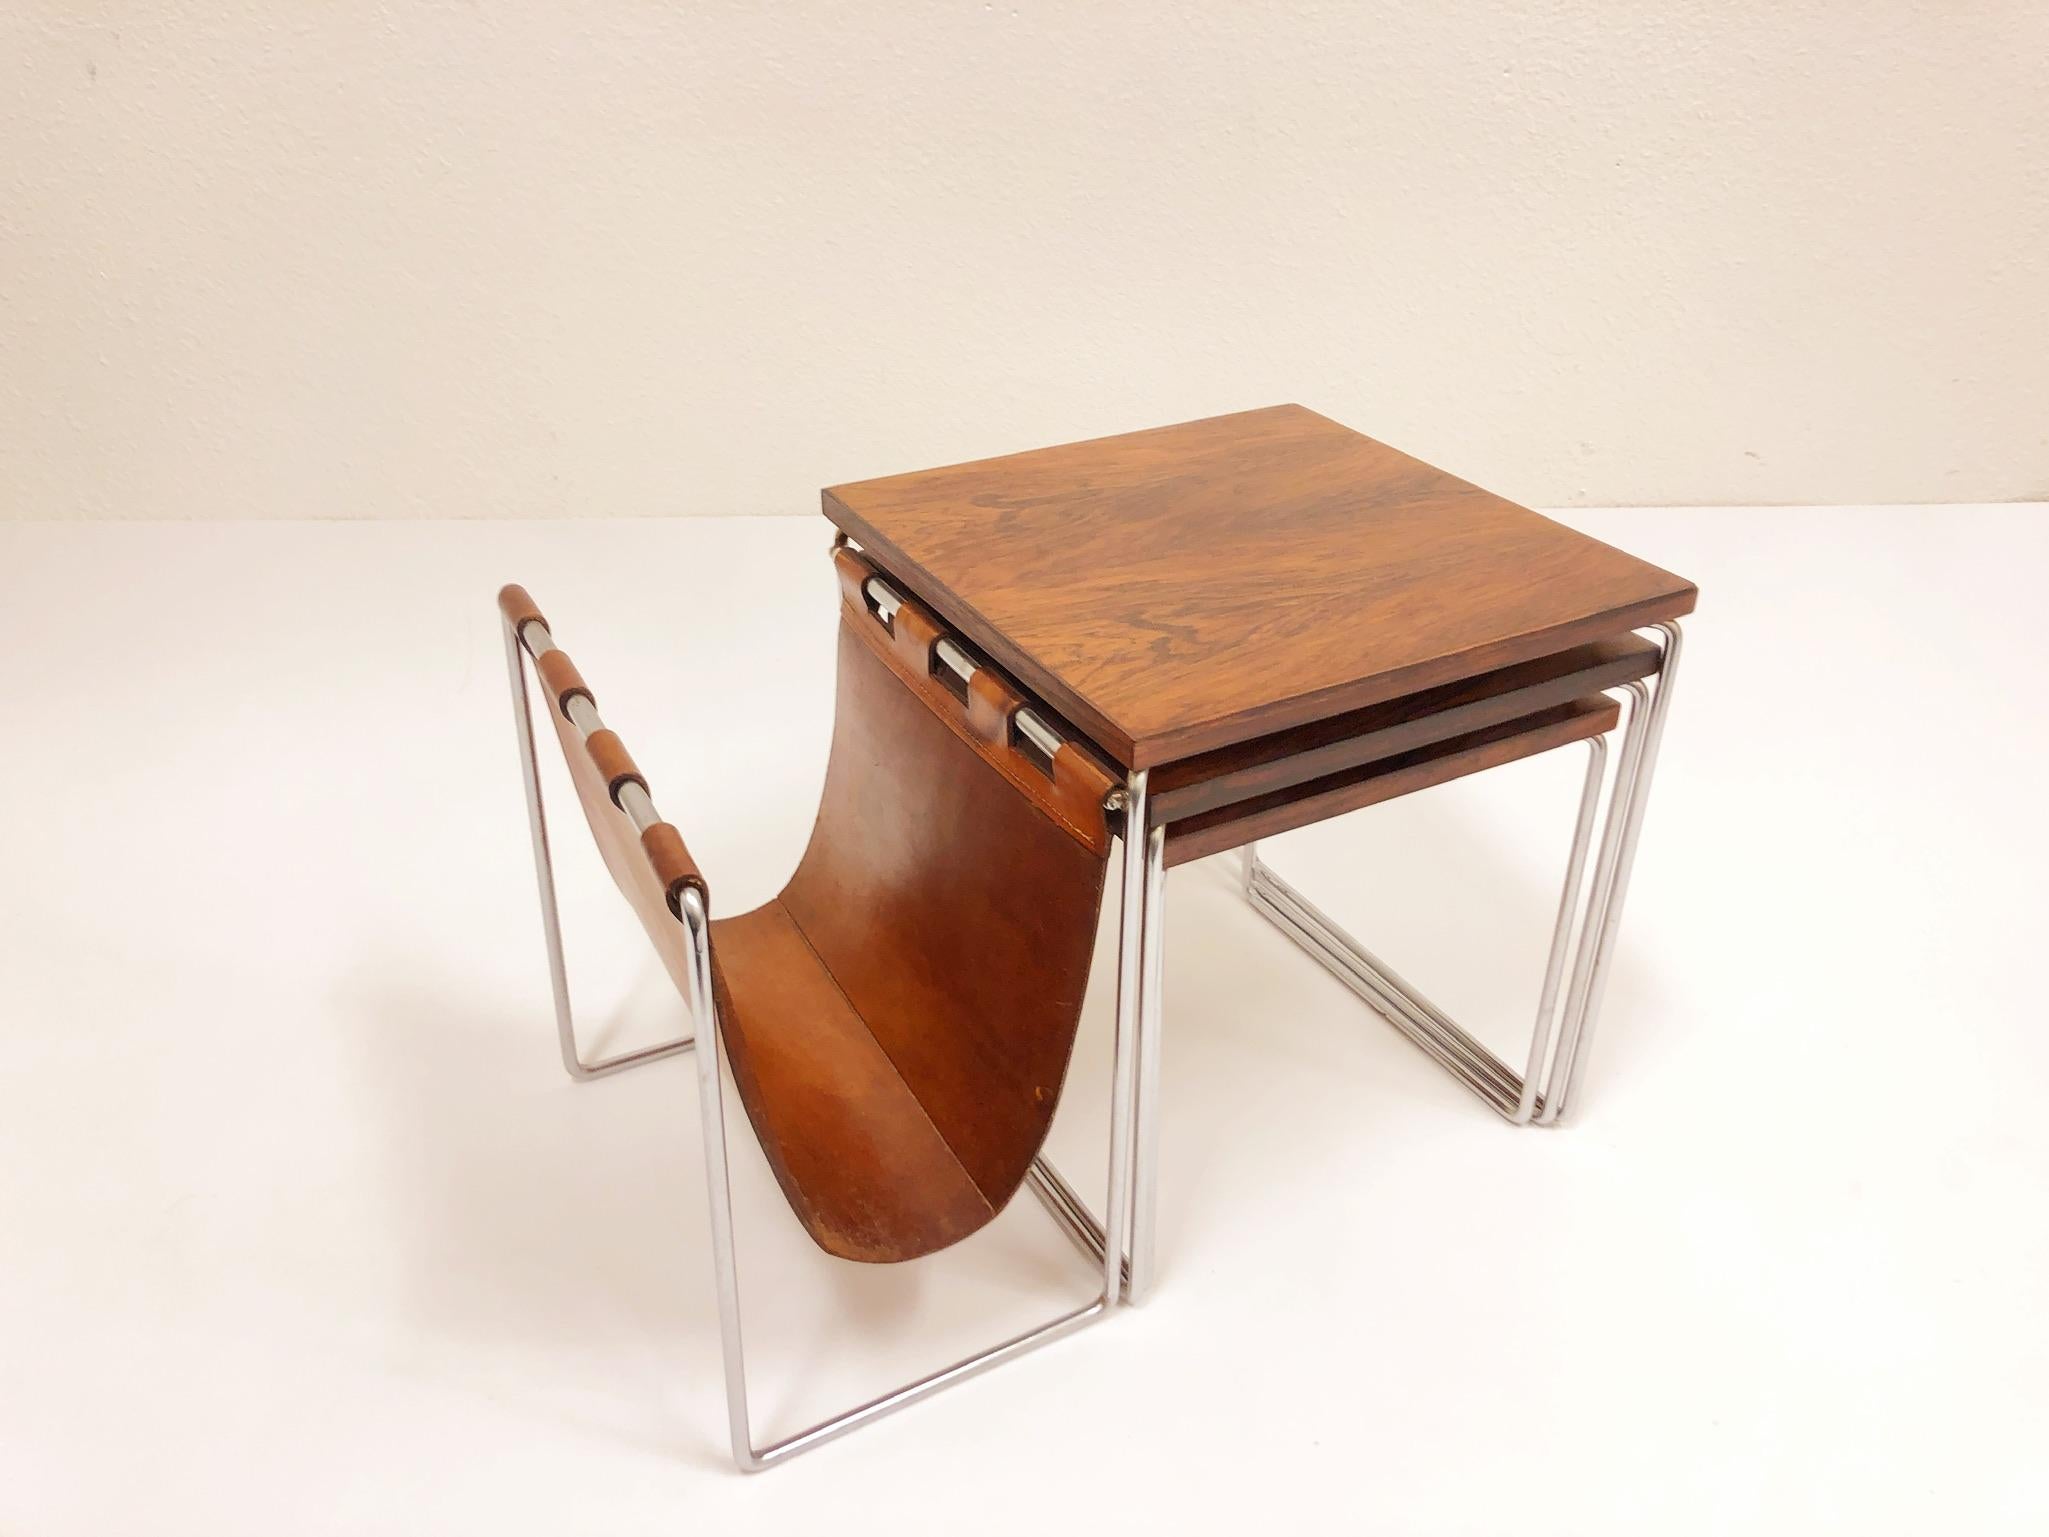 Rosewood and Chrome Nesting Tables (Unbekannt)